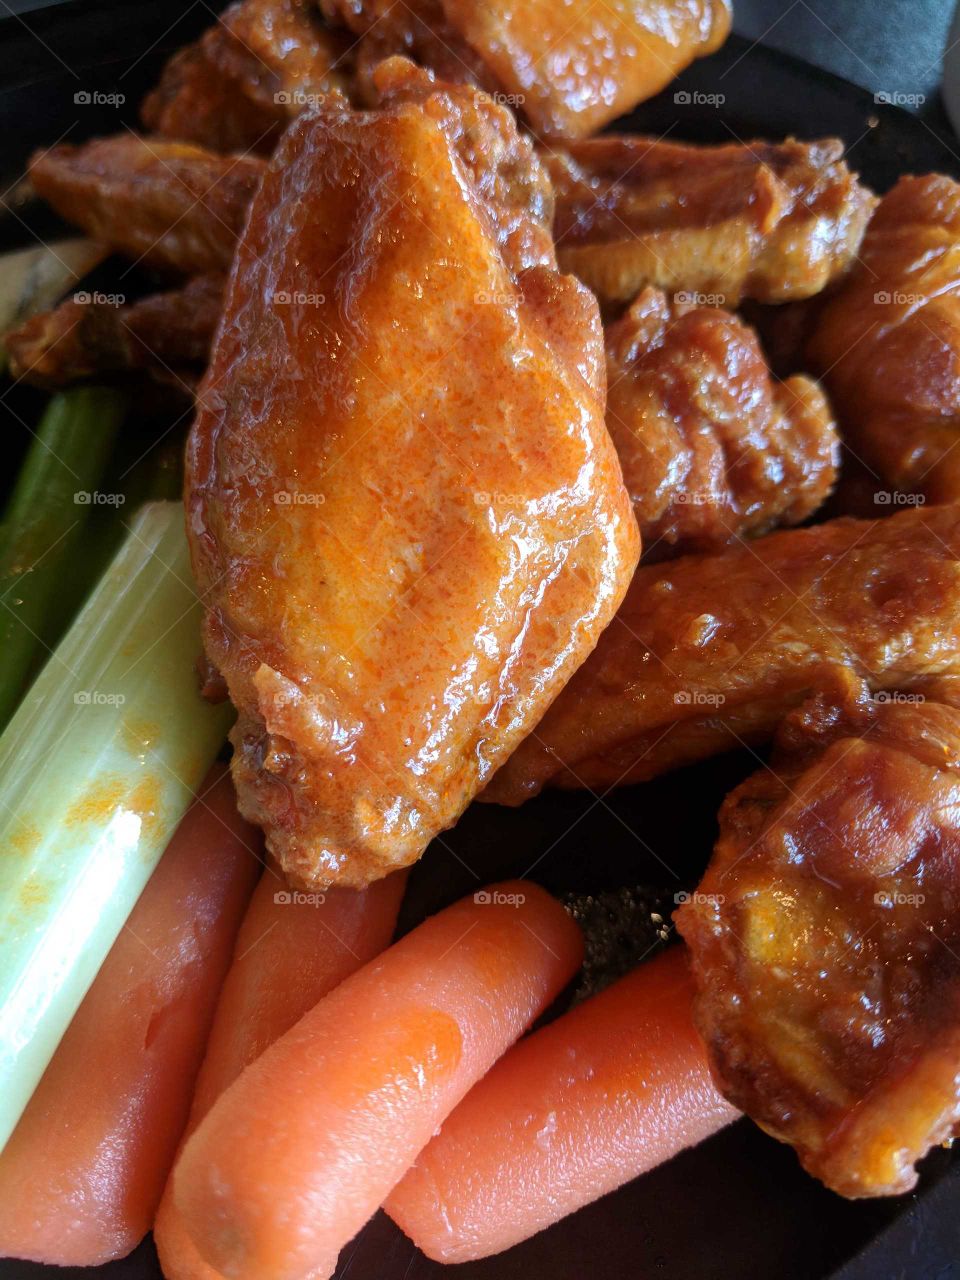 Tasty, Delicious Buffalo Chicken Wings, Carrots, and Celery at Duff's Famous Wings near Buffalo, New York